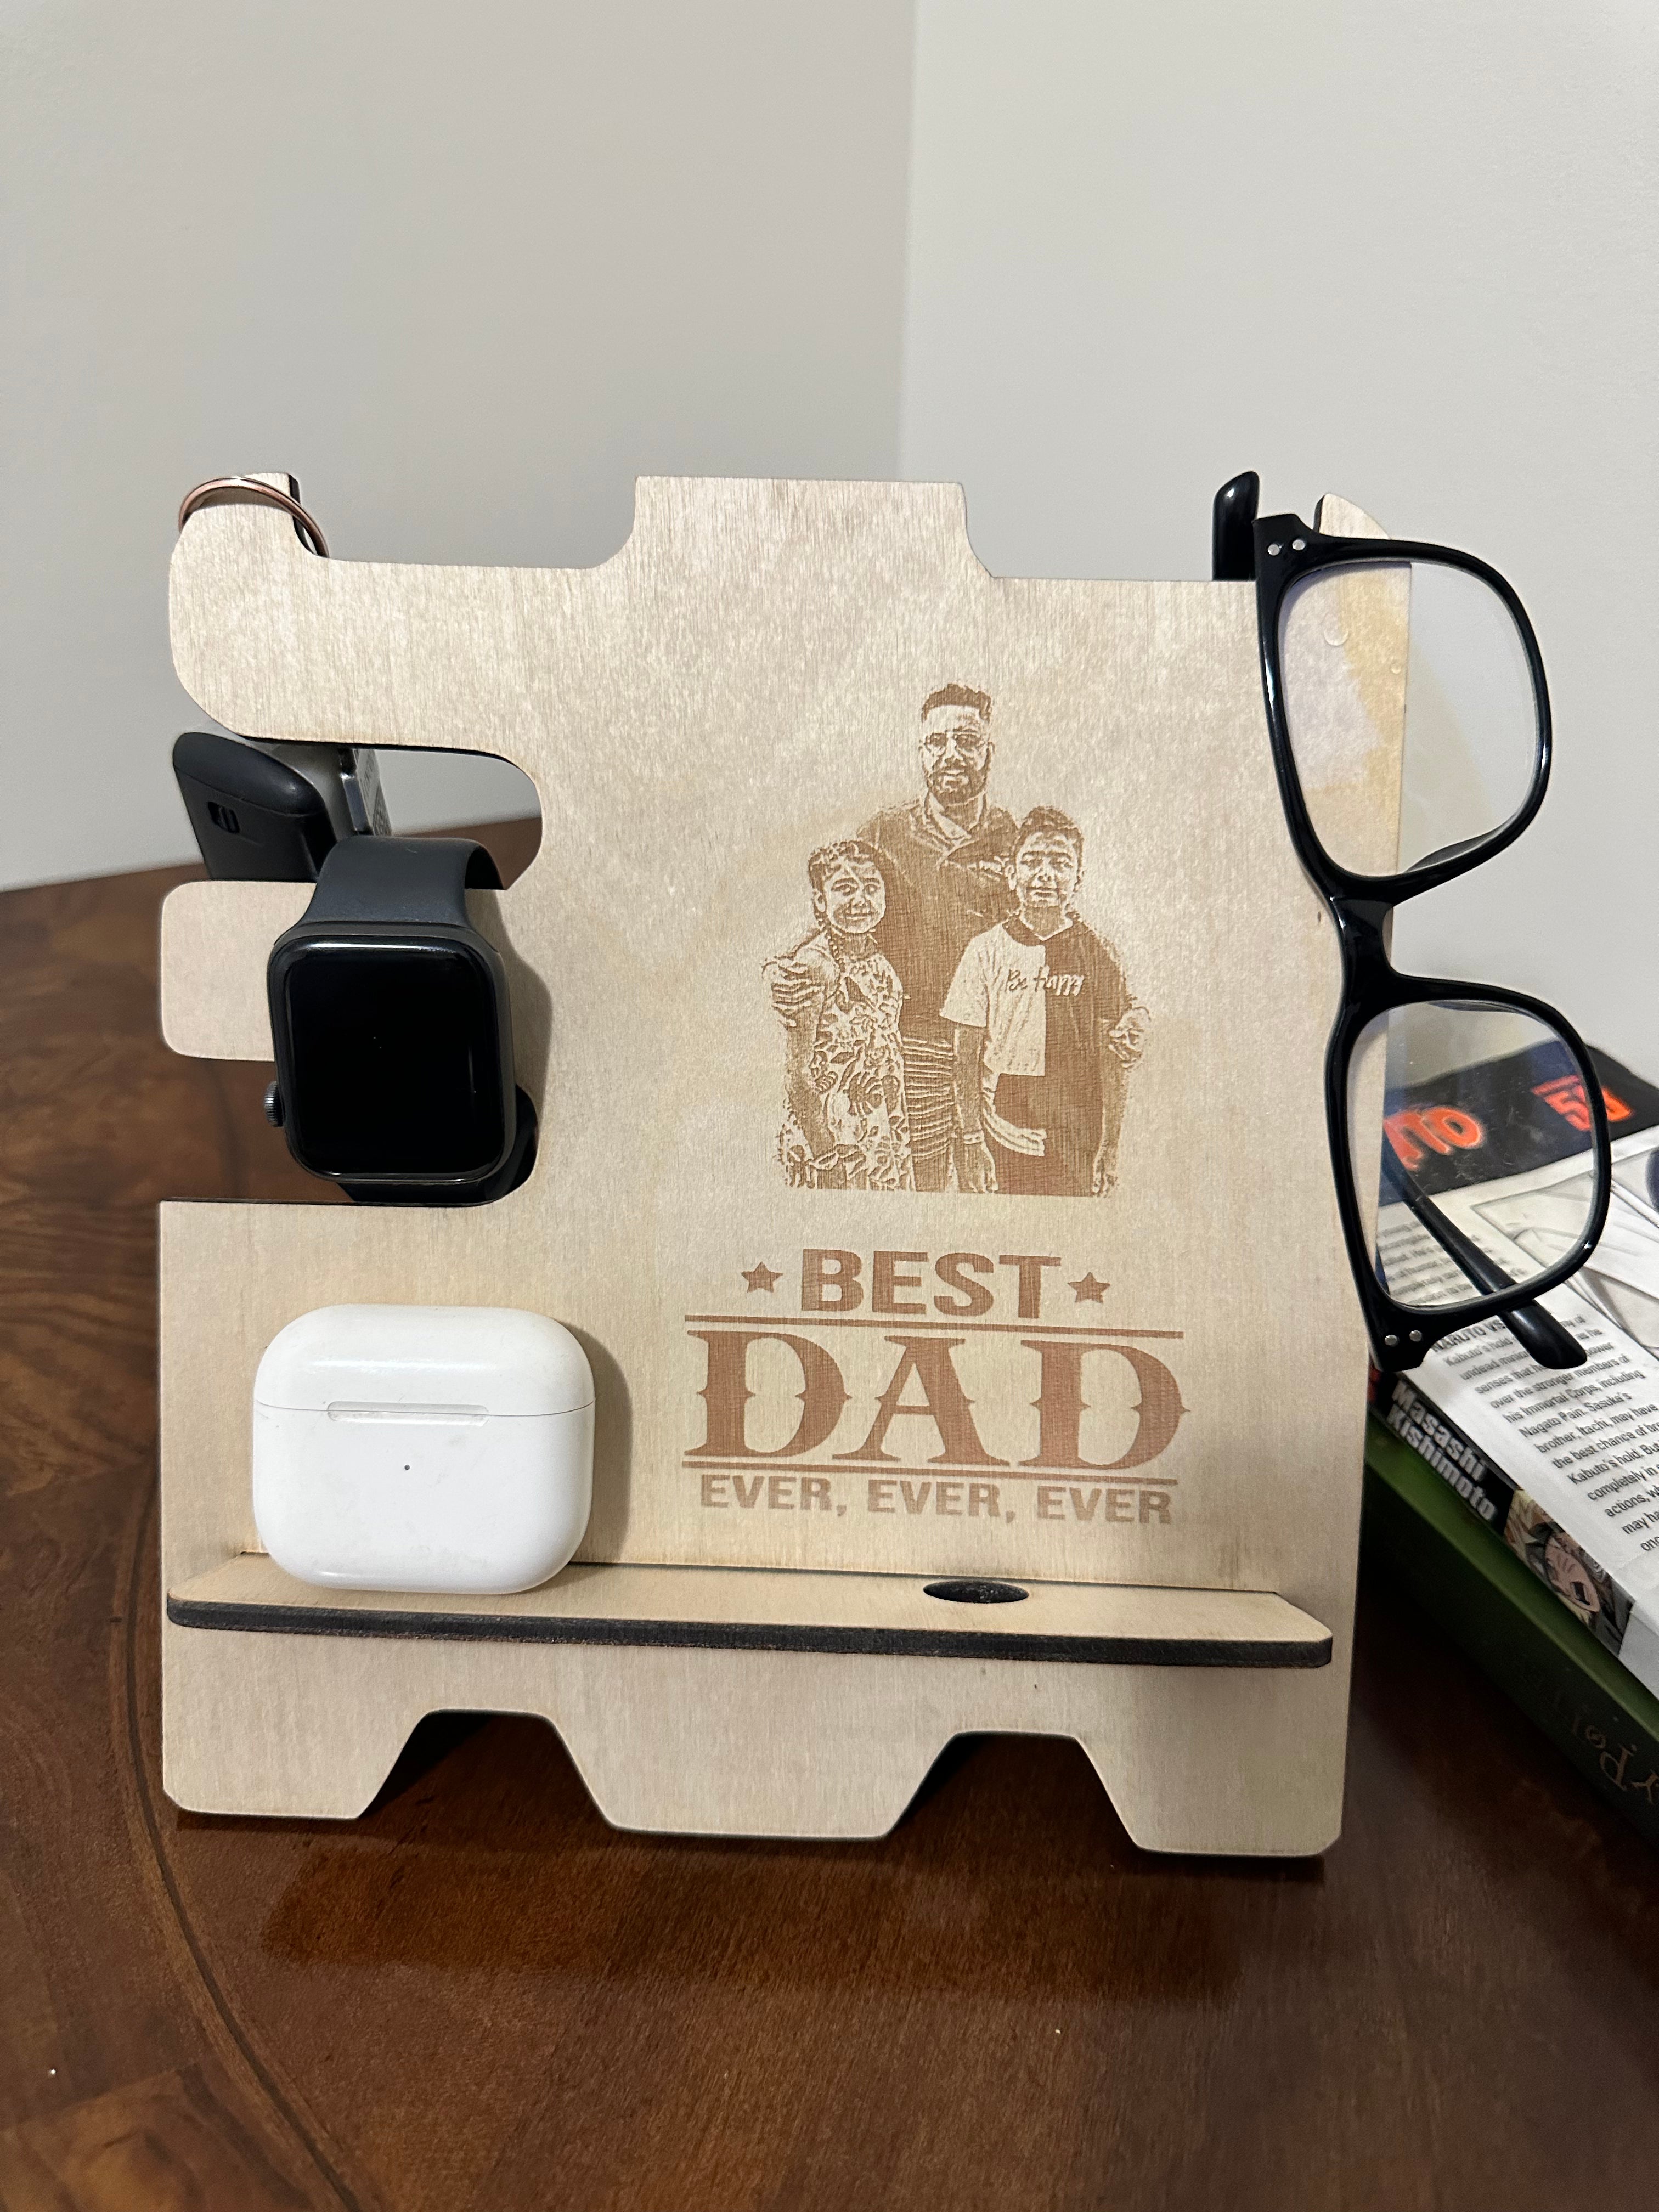  Docking Station PERSONALIZED MENS GIFT gifts for men Apple  Watch Stand wooden docking station gift ideas for men gifts for boyfriend :  Handmade Products